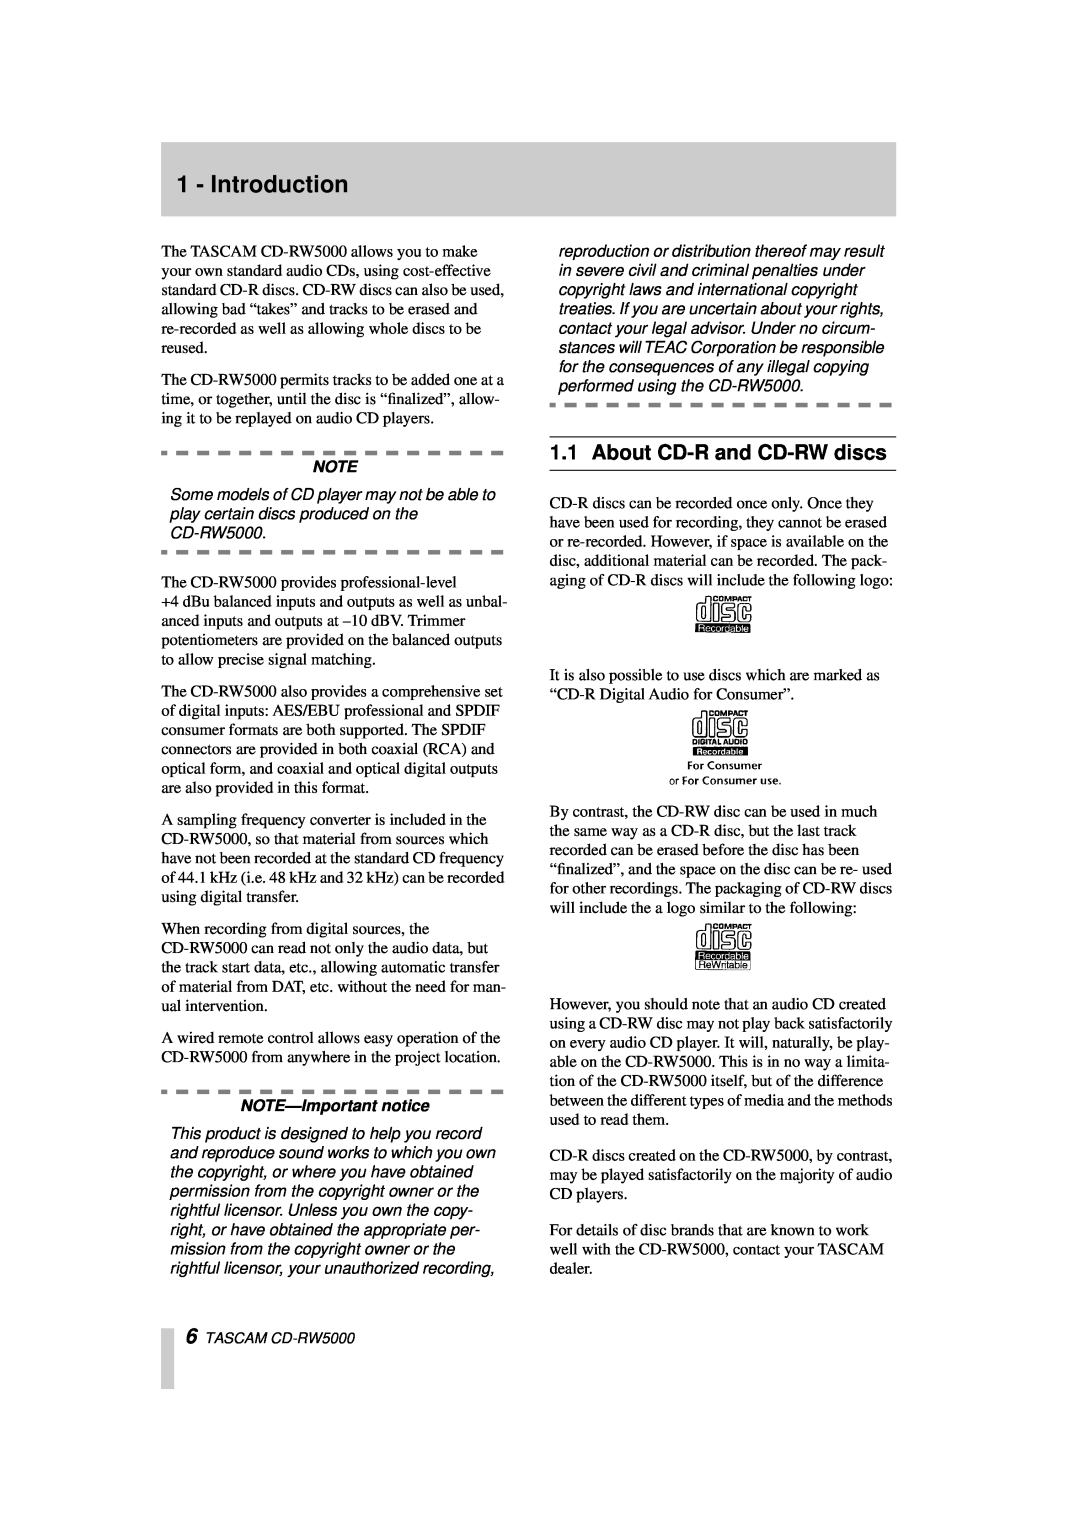 Tascam CD-RW5000 owner manual Introduction, About CD-Rand CD-RWdiscs, NOTE-Importantnotice 